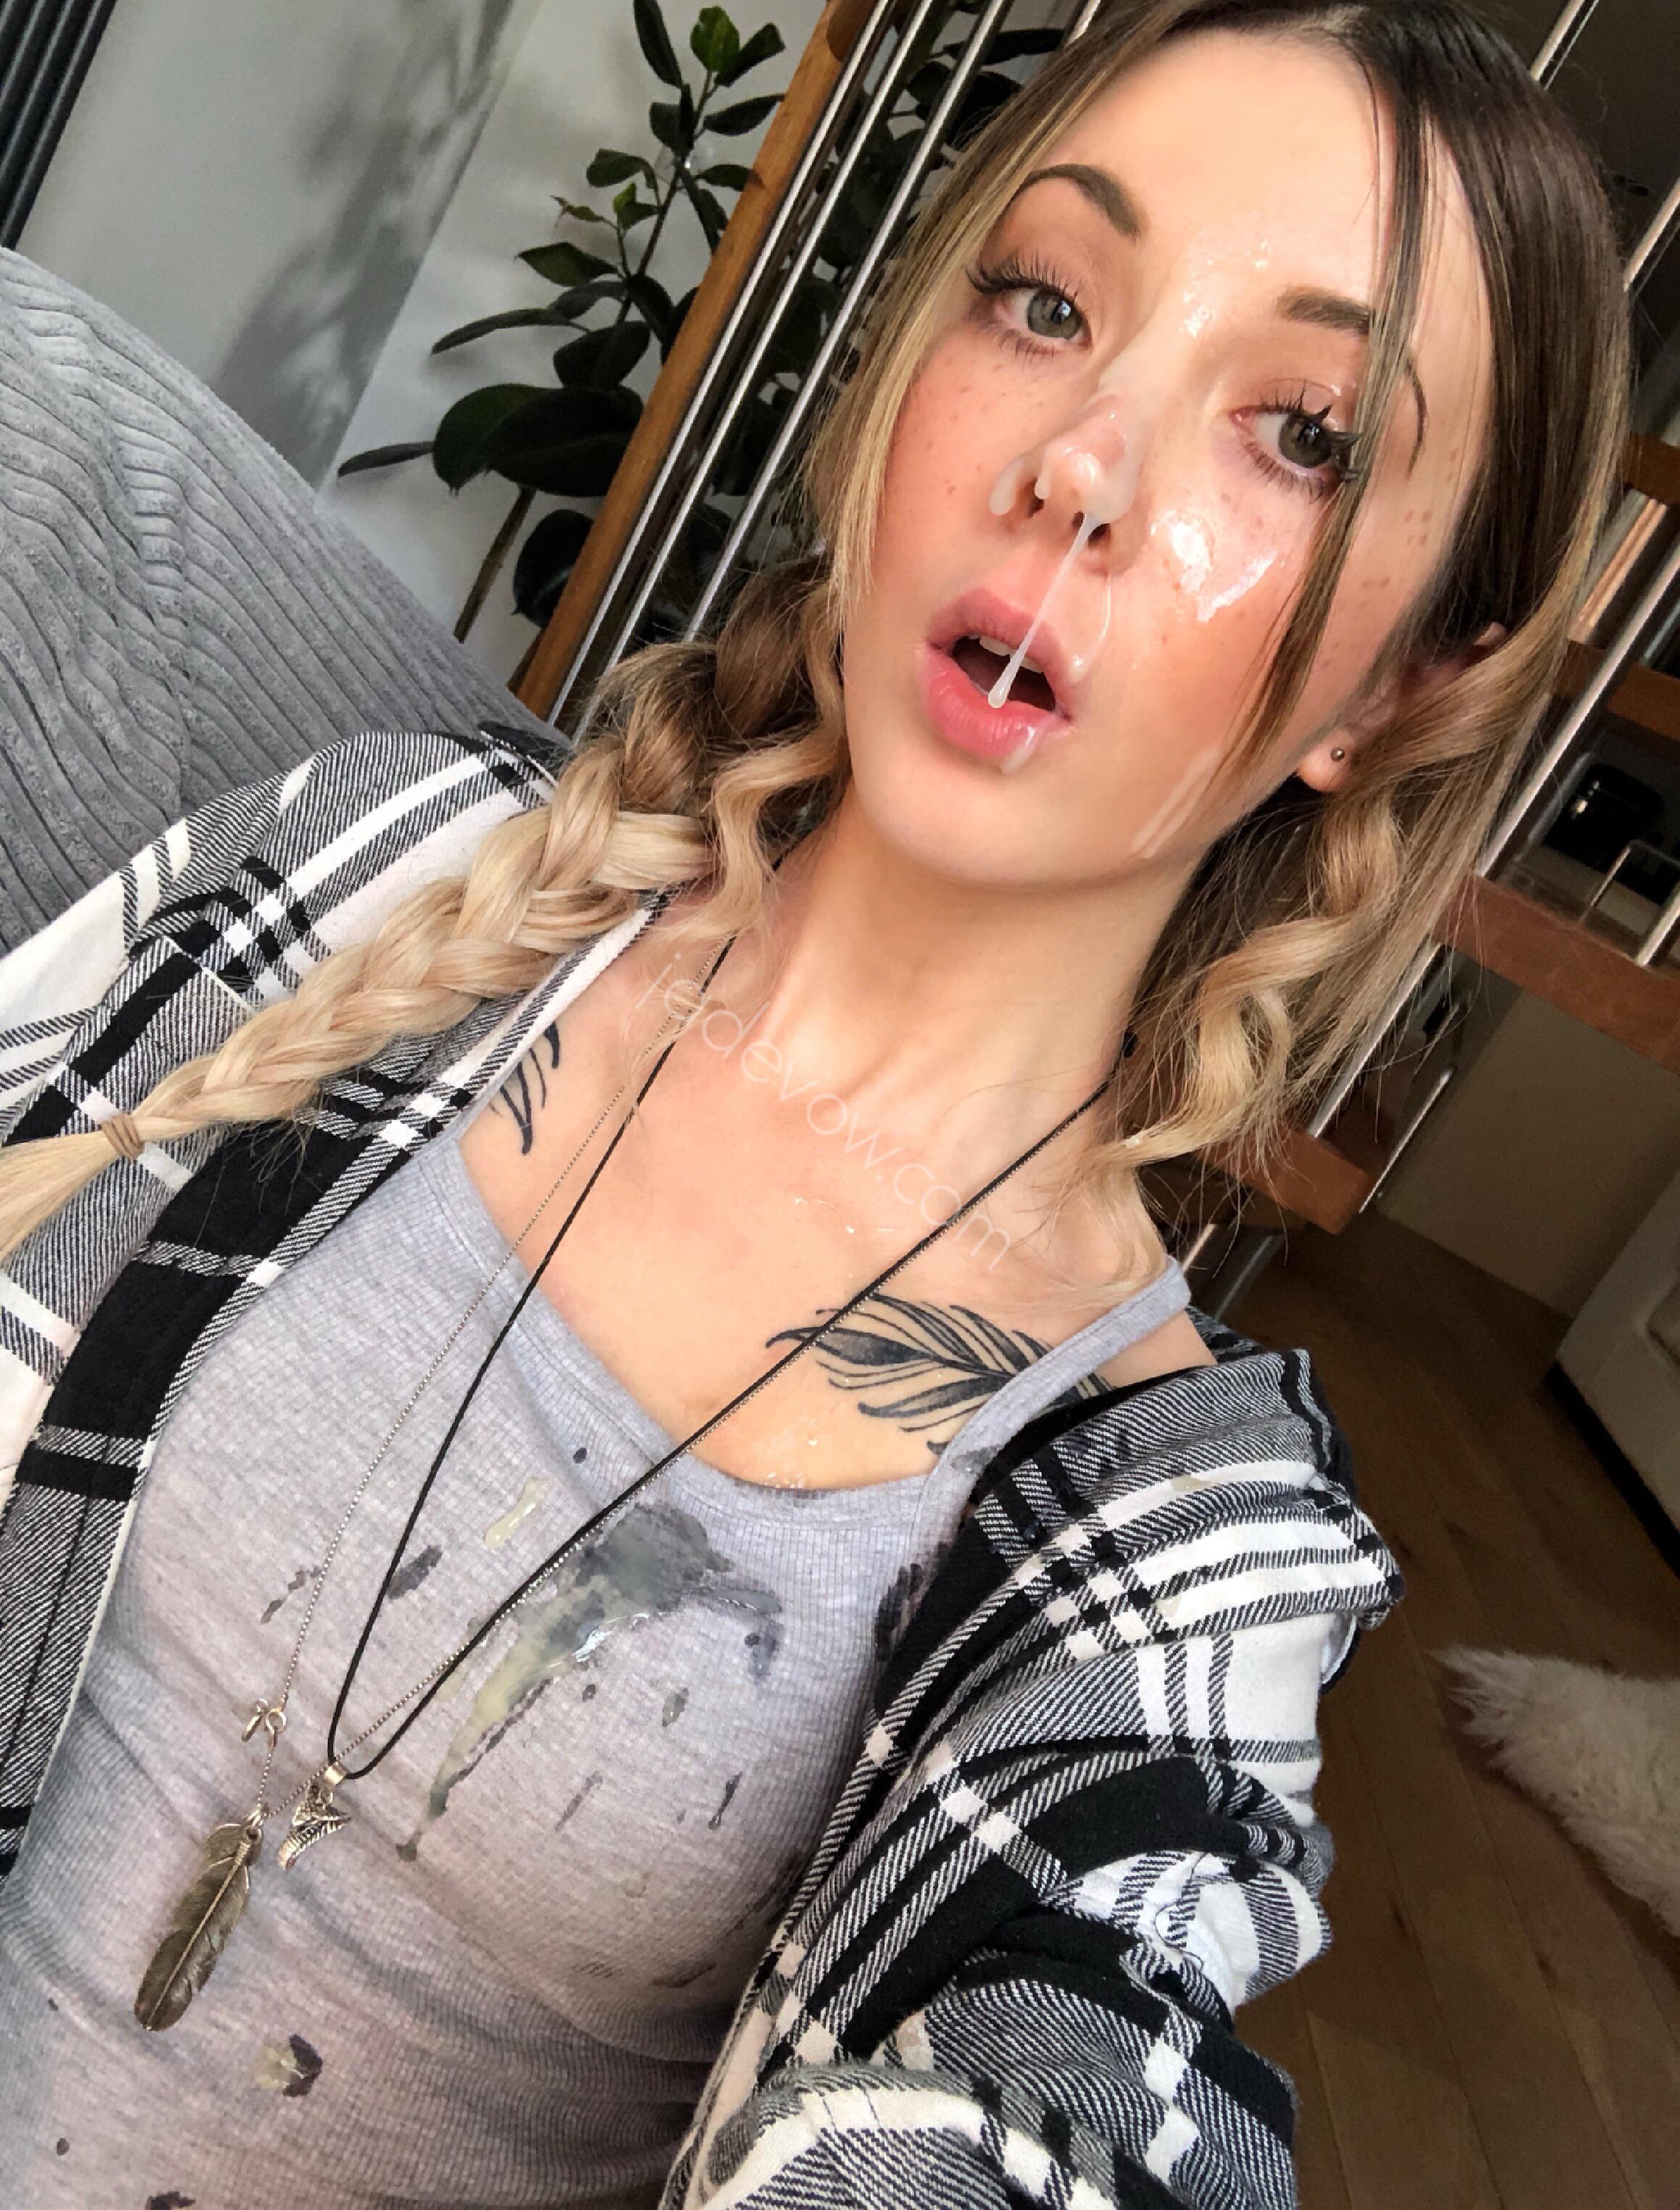 galleries girl tongue out selfie